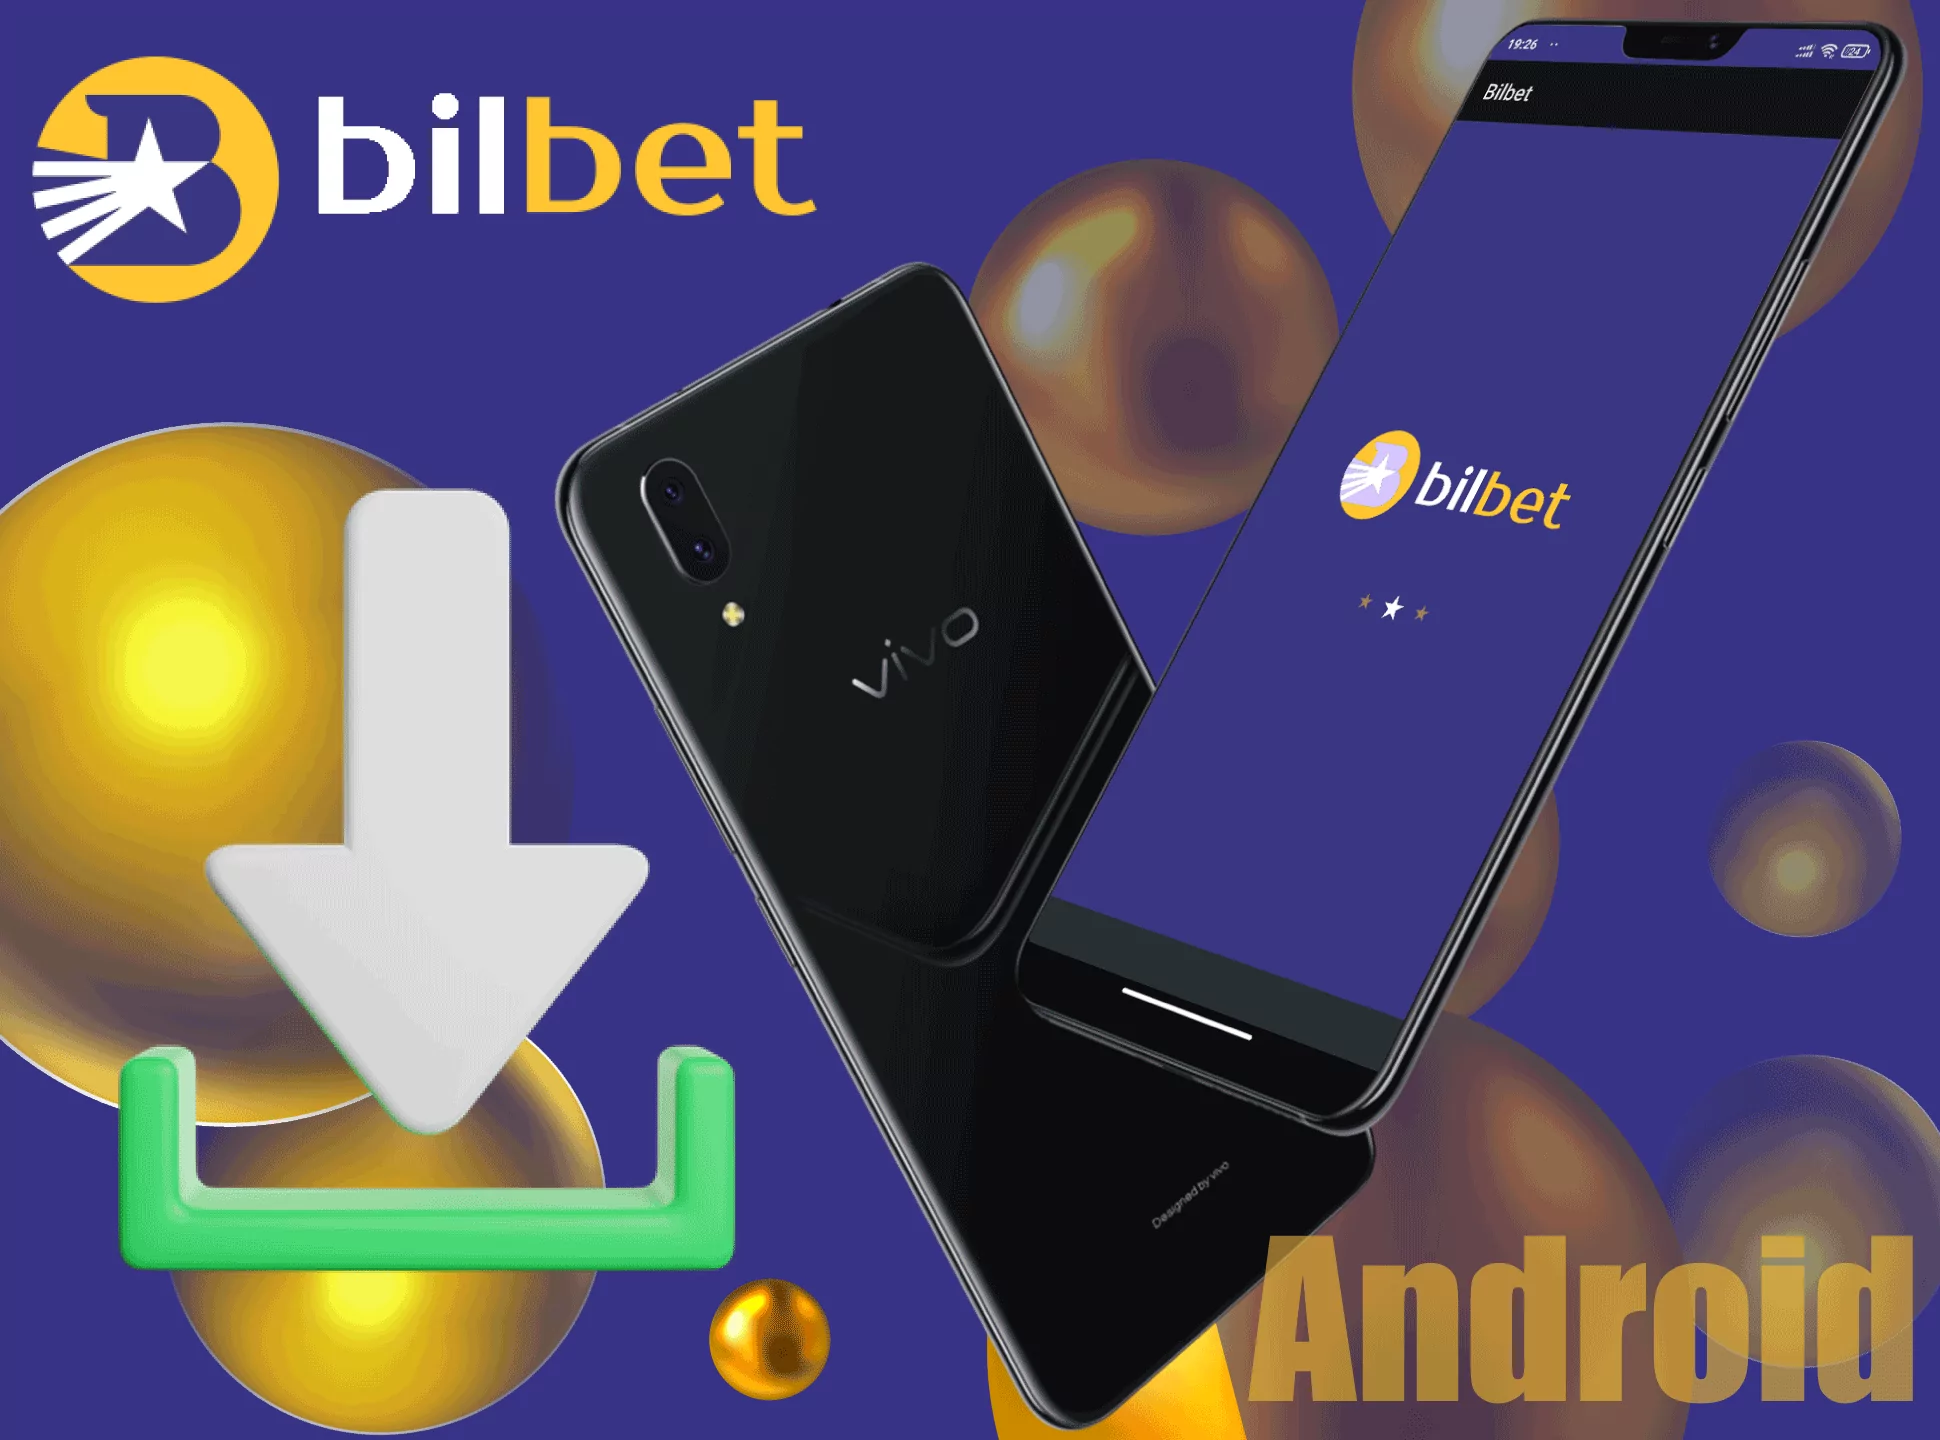 Download the Bilbet Android app to place bets whenever you want.